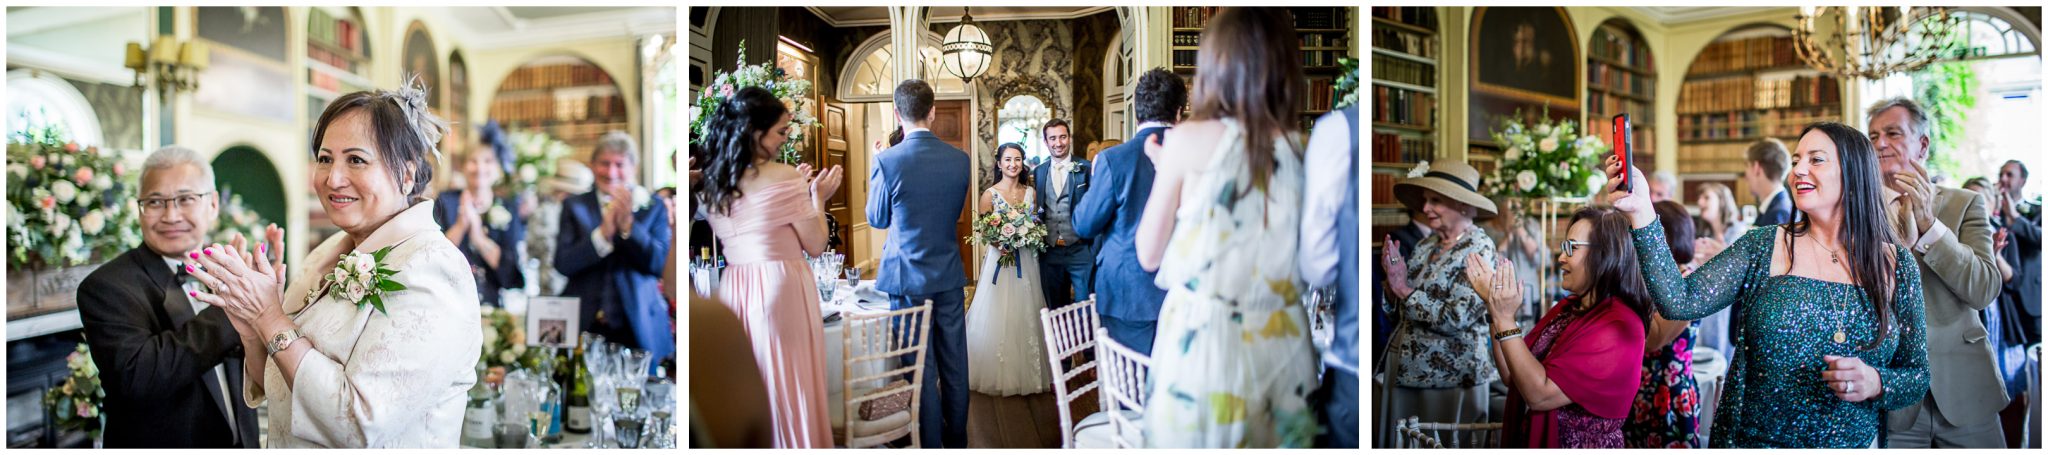 Friends and family clap as the couple enter the dining room for the wedding breakfast